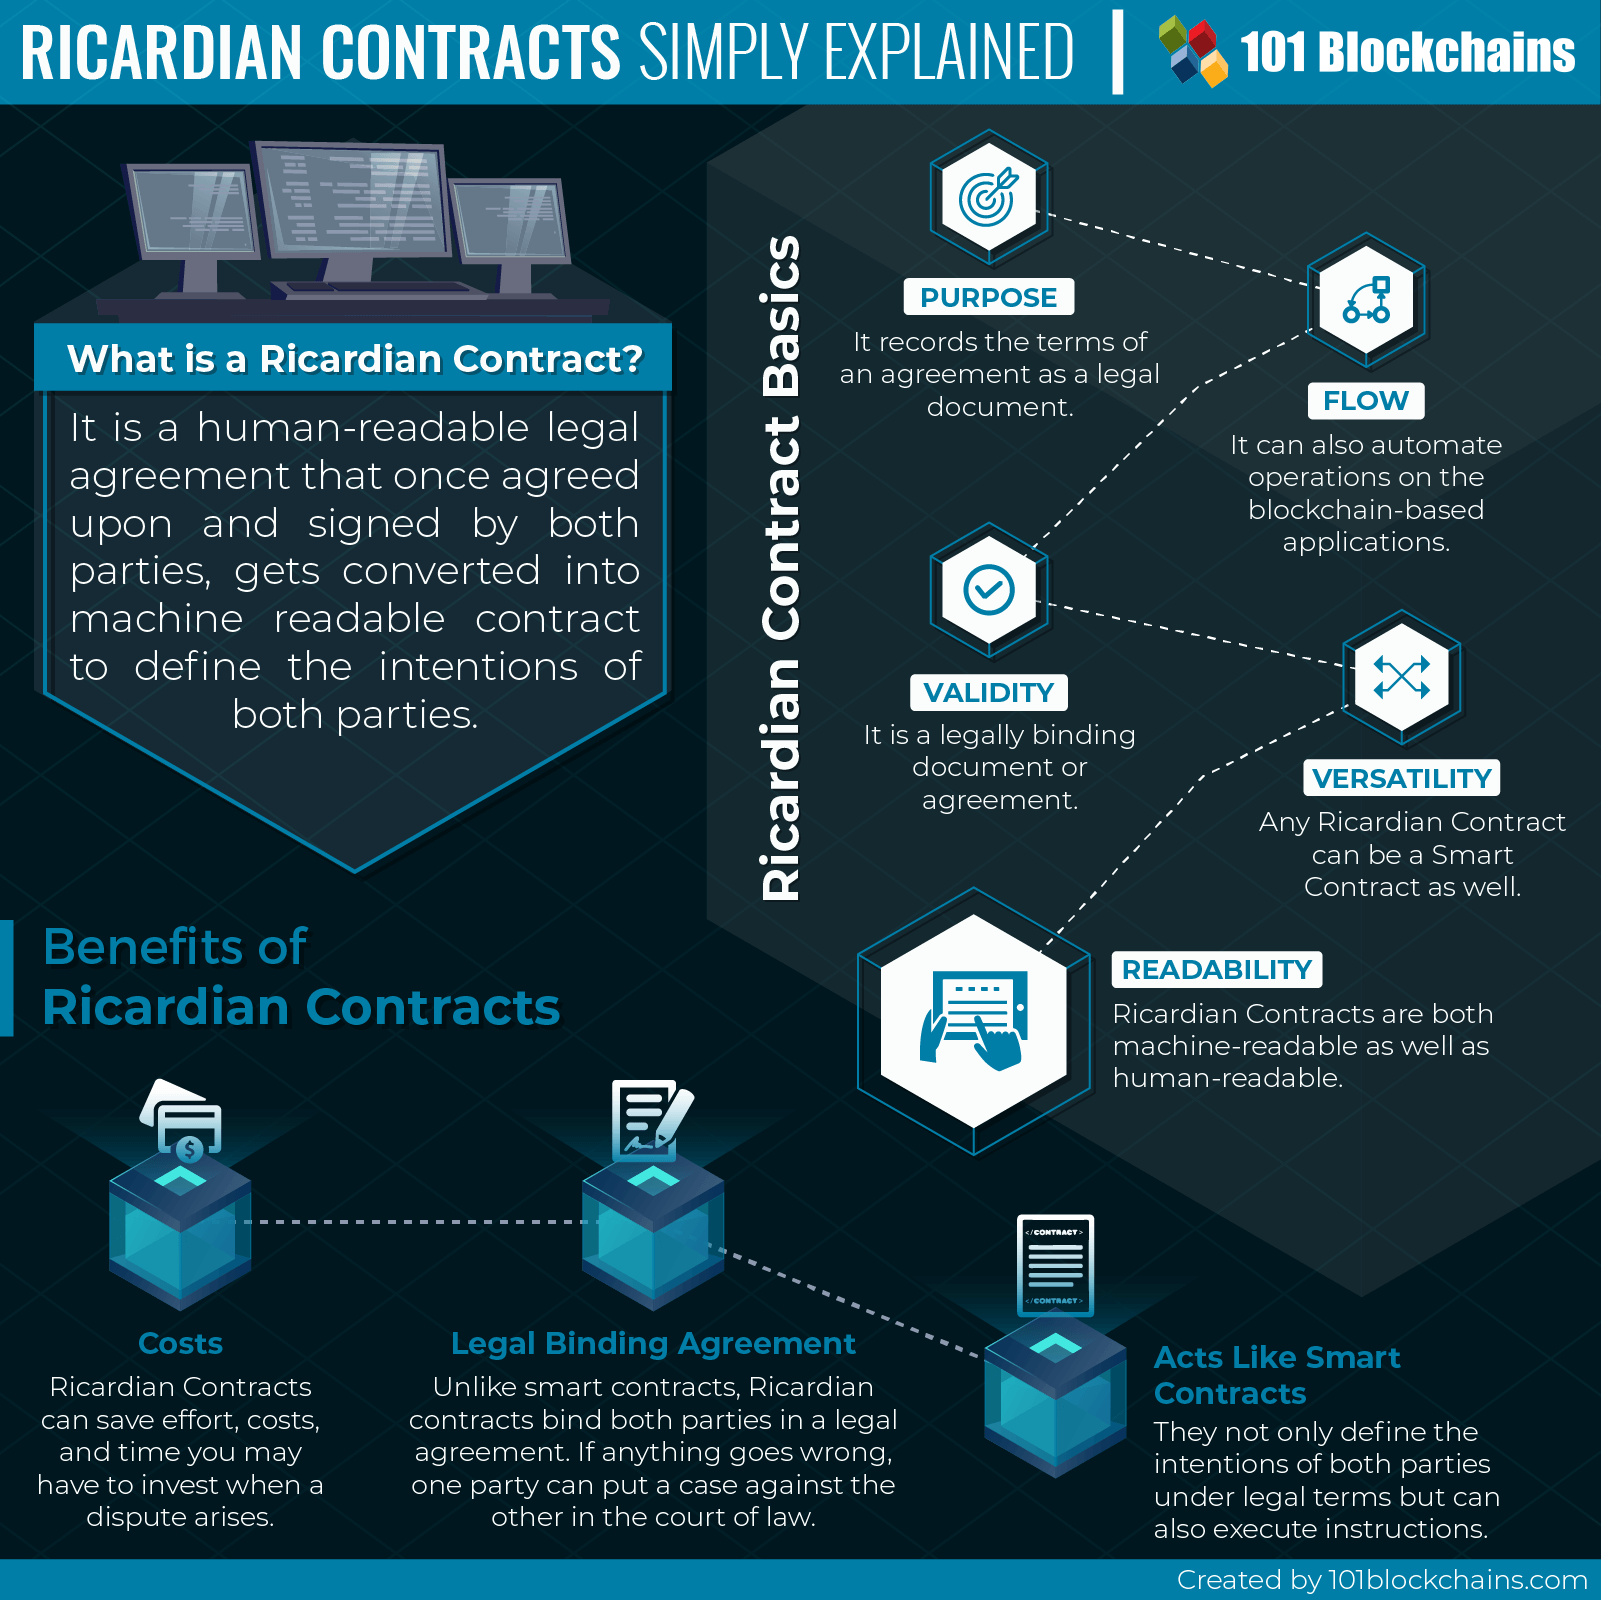 Ricardian Contracts